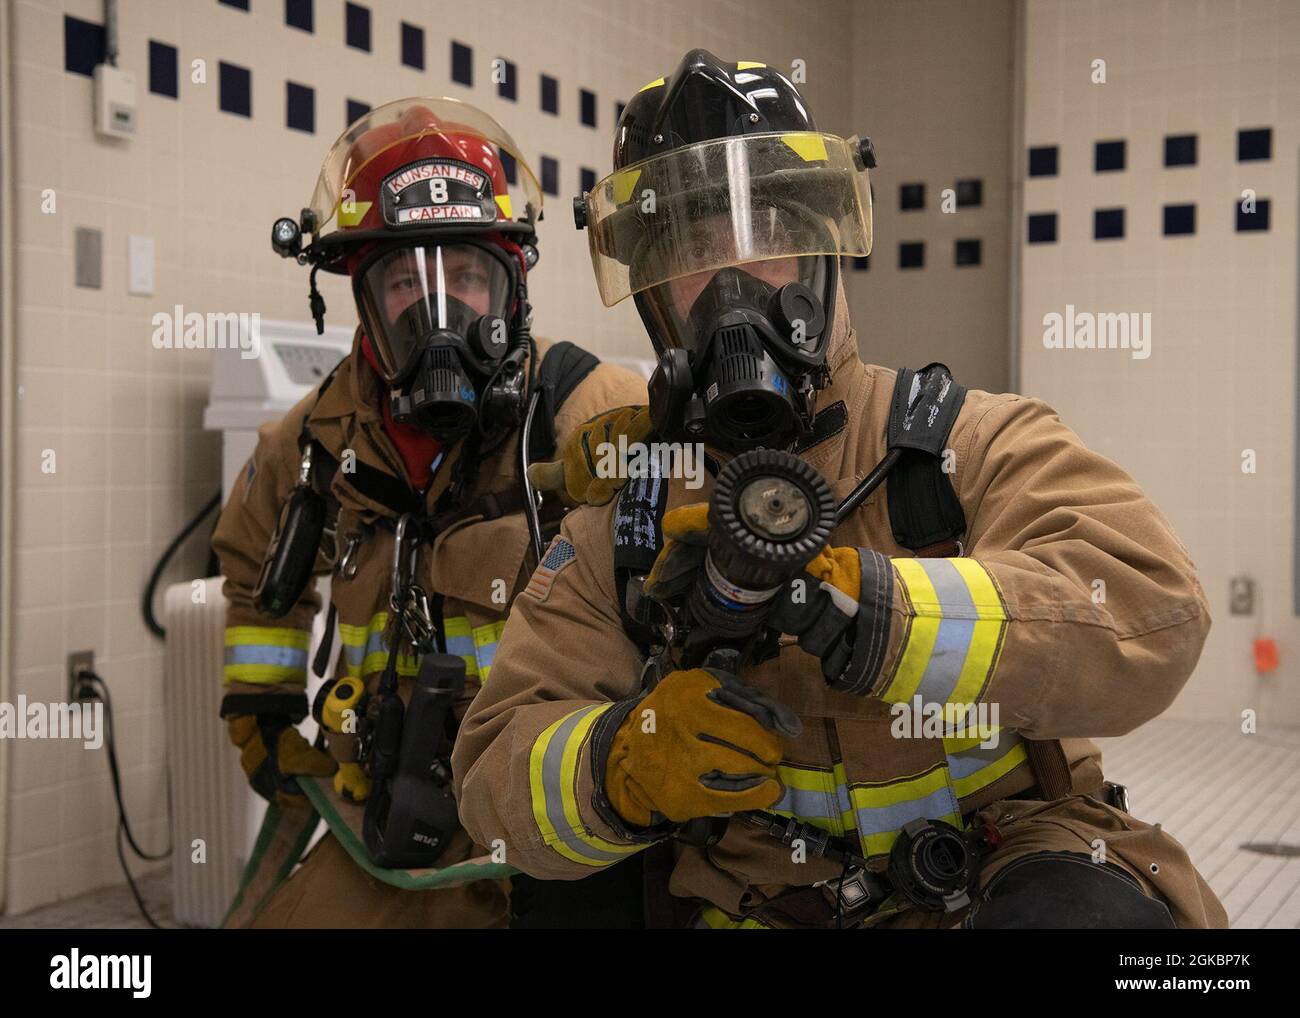 U.S. Air Force Senior Airman Thomas Ulric, 8th Civil Engineer Squadron firefighter lineman (right), and USAF Staff Sgt. John Cools, 8th CES firefighter crew chief (left), simulate fighting a fire in a high-rise building at Kunsan Air Base, Republic of Korea, 5 March 2021. Air Force firefighters train for speed and efficiency when performing regular firefighting exercises. Stock Photo